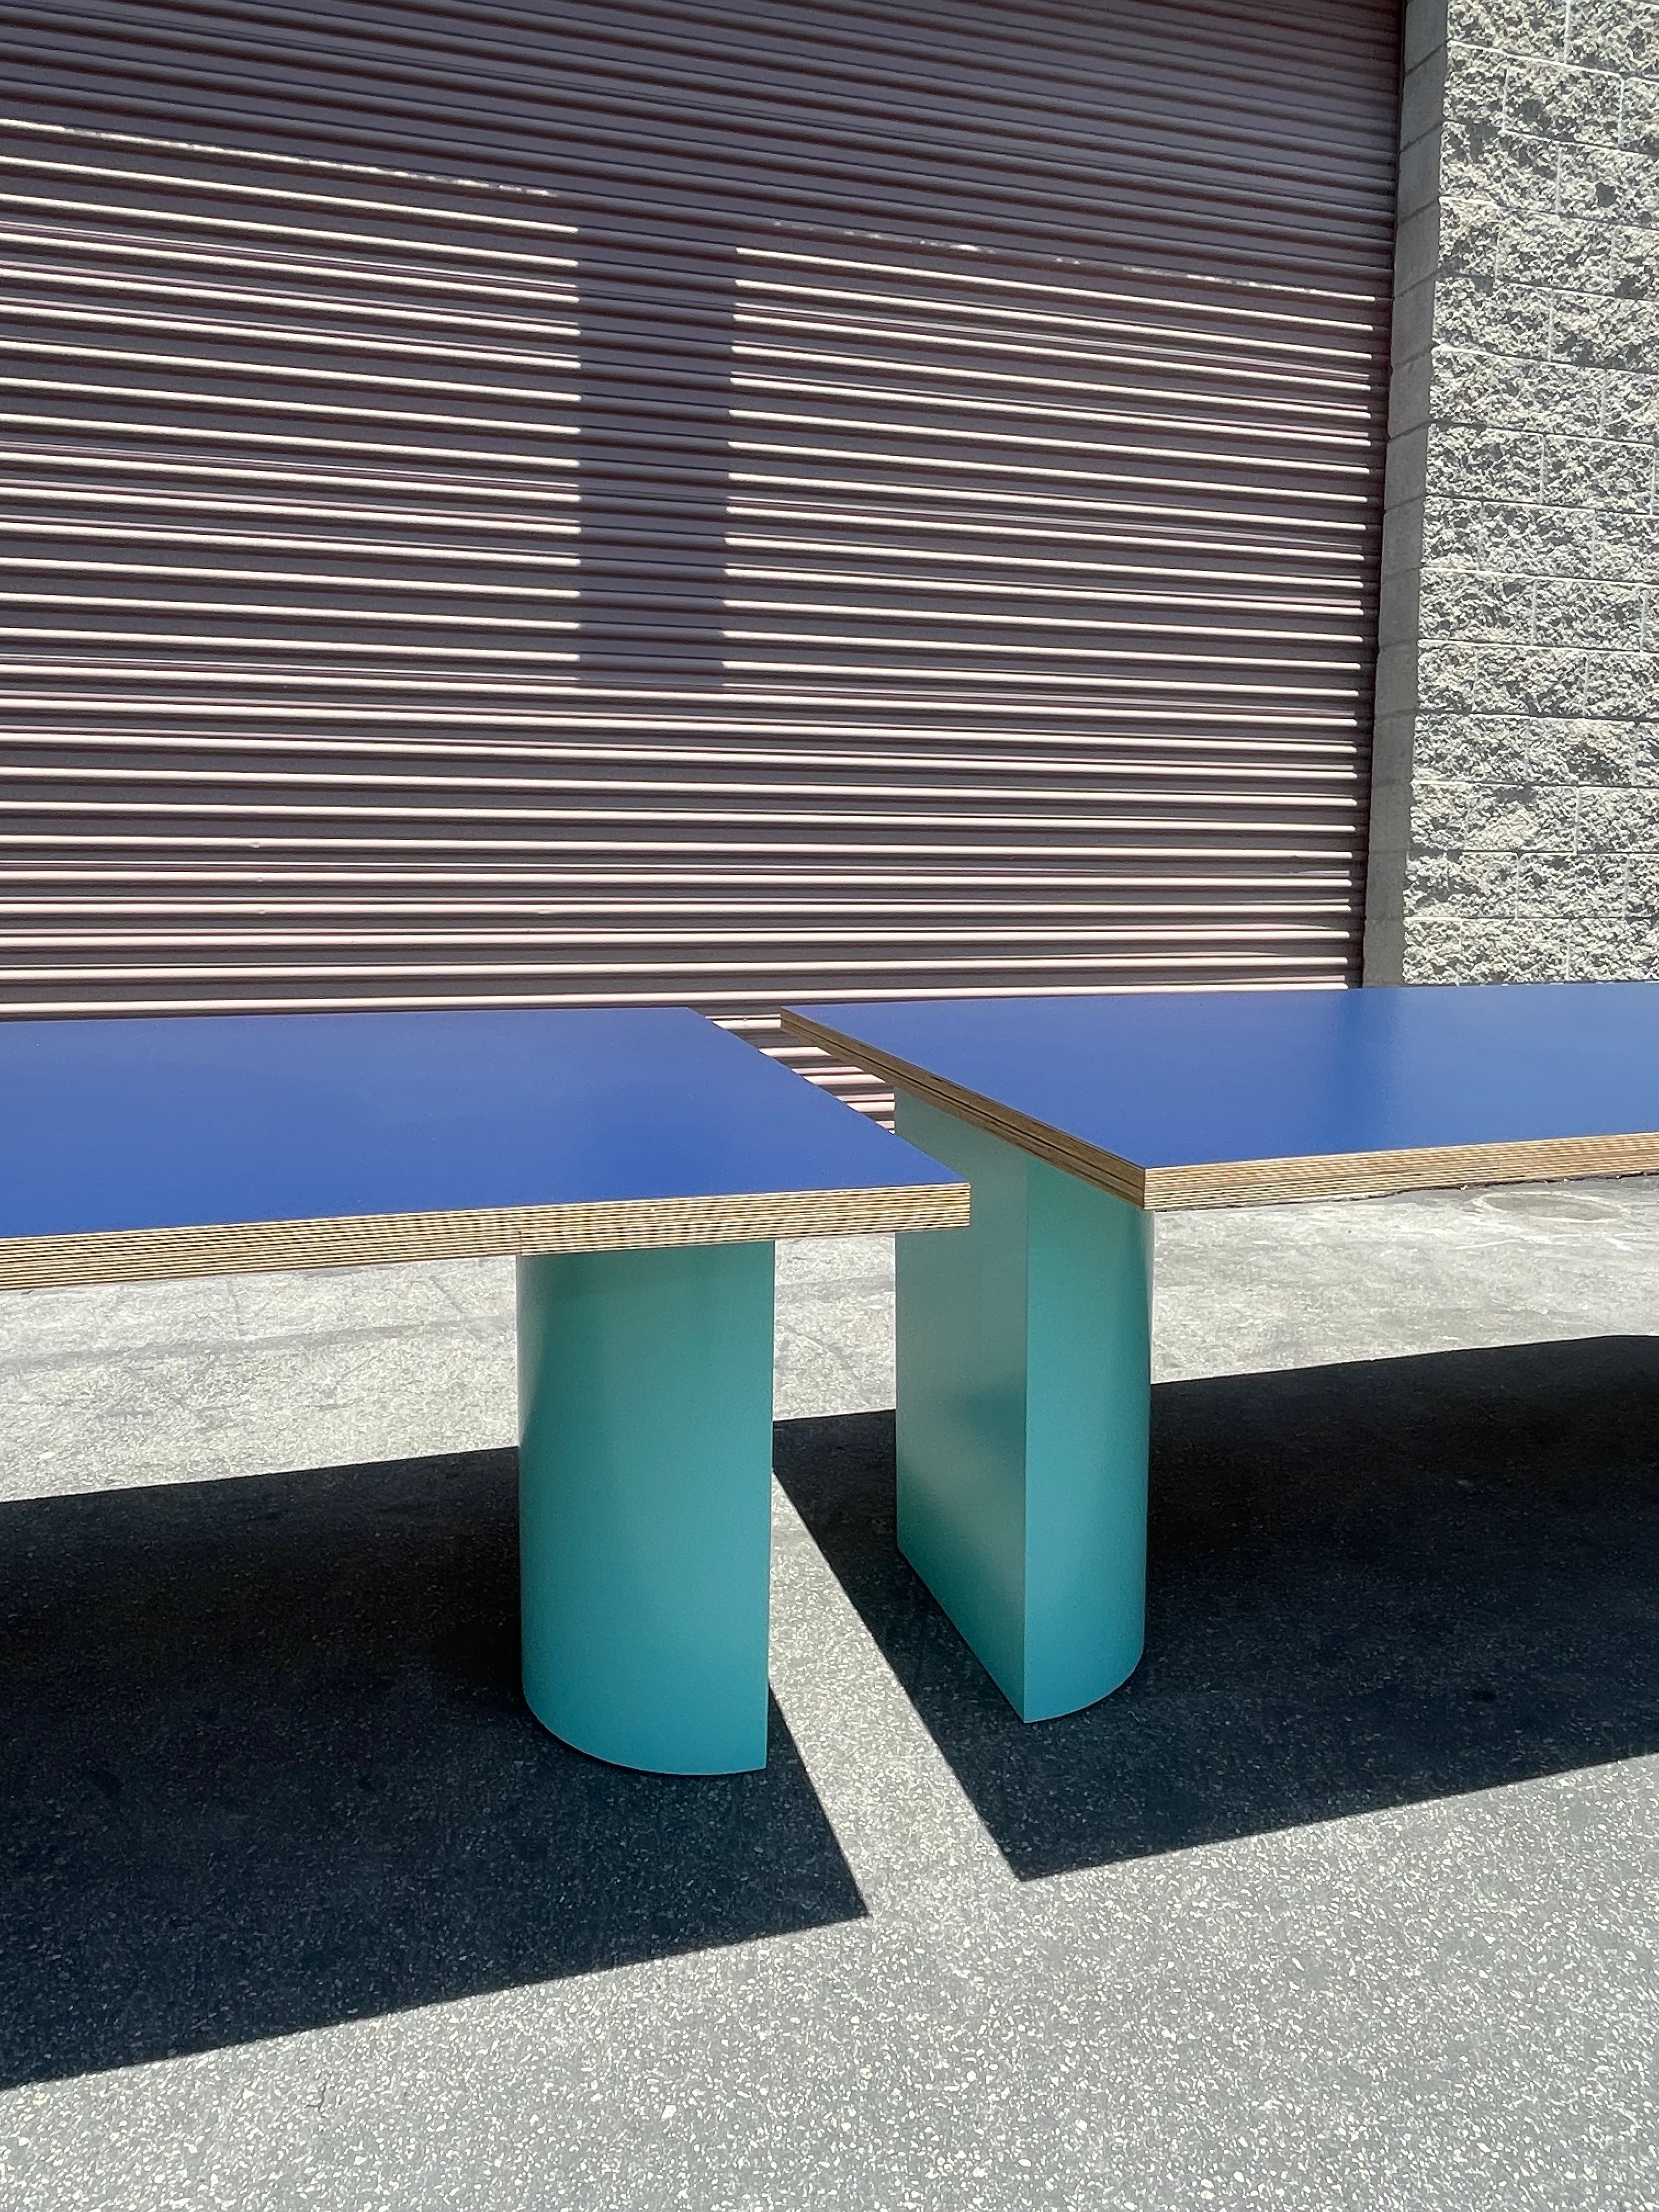  Communal Table - Rapt Studio / ChowNow product image 8